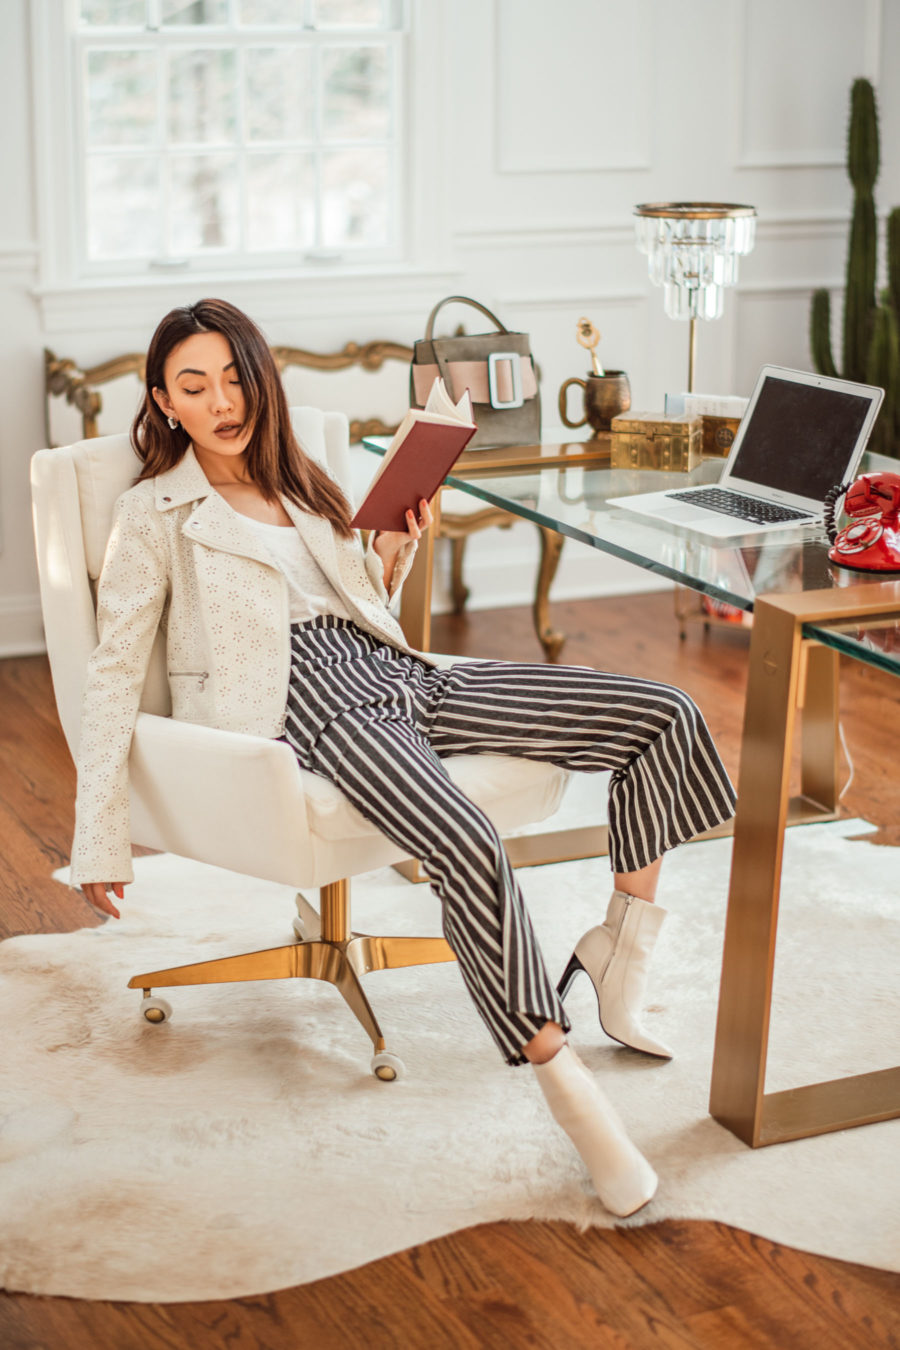 trouser styles for women featuring printed trousers // Notjessfashion.com